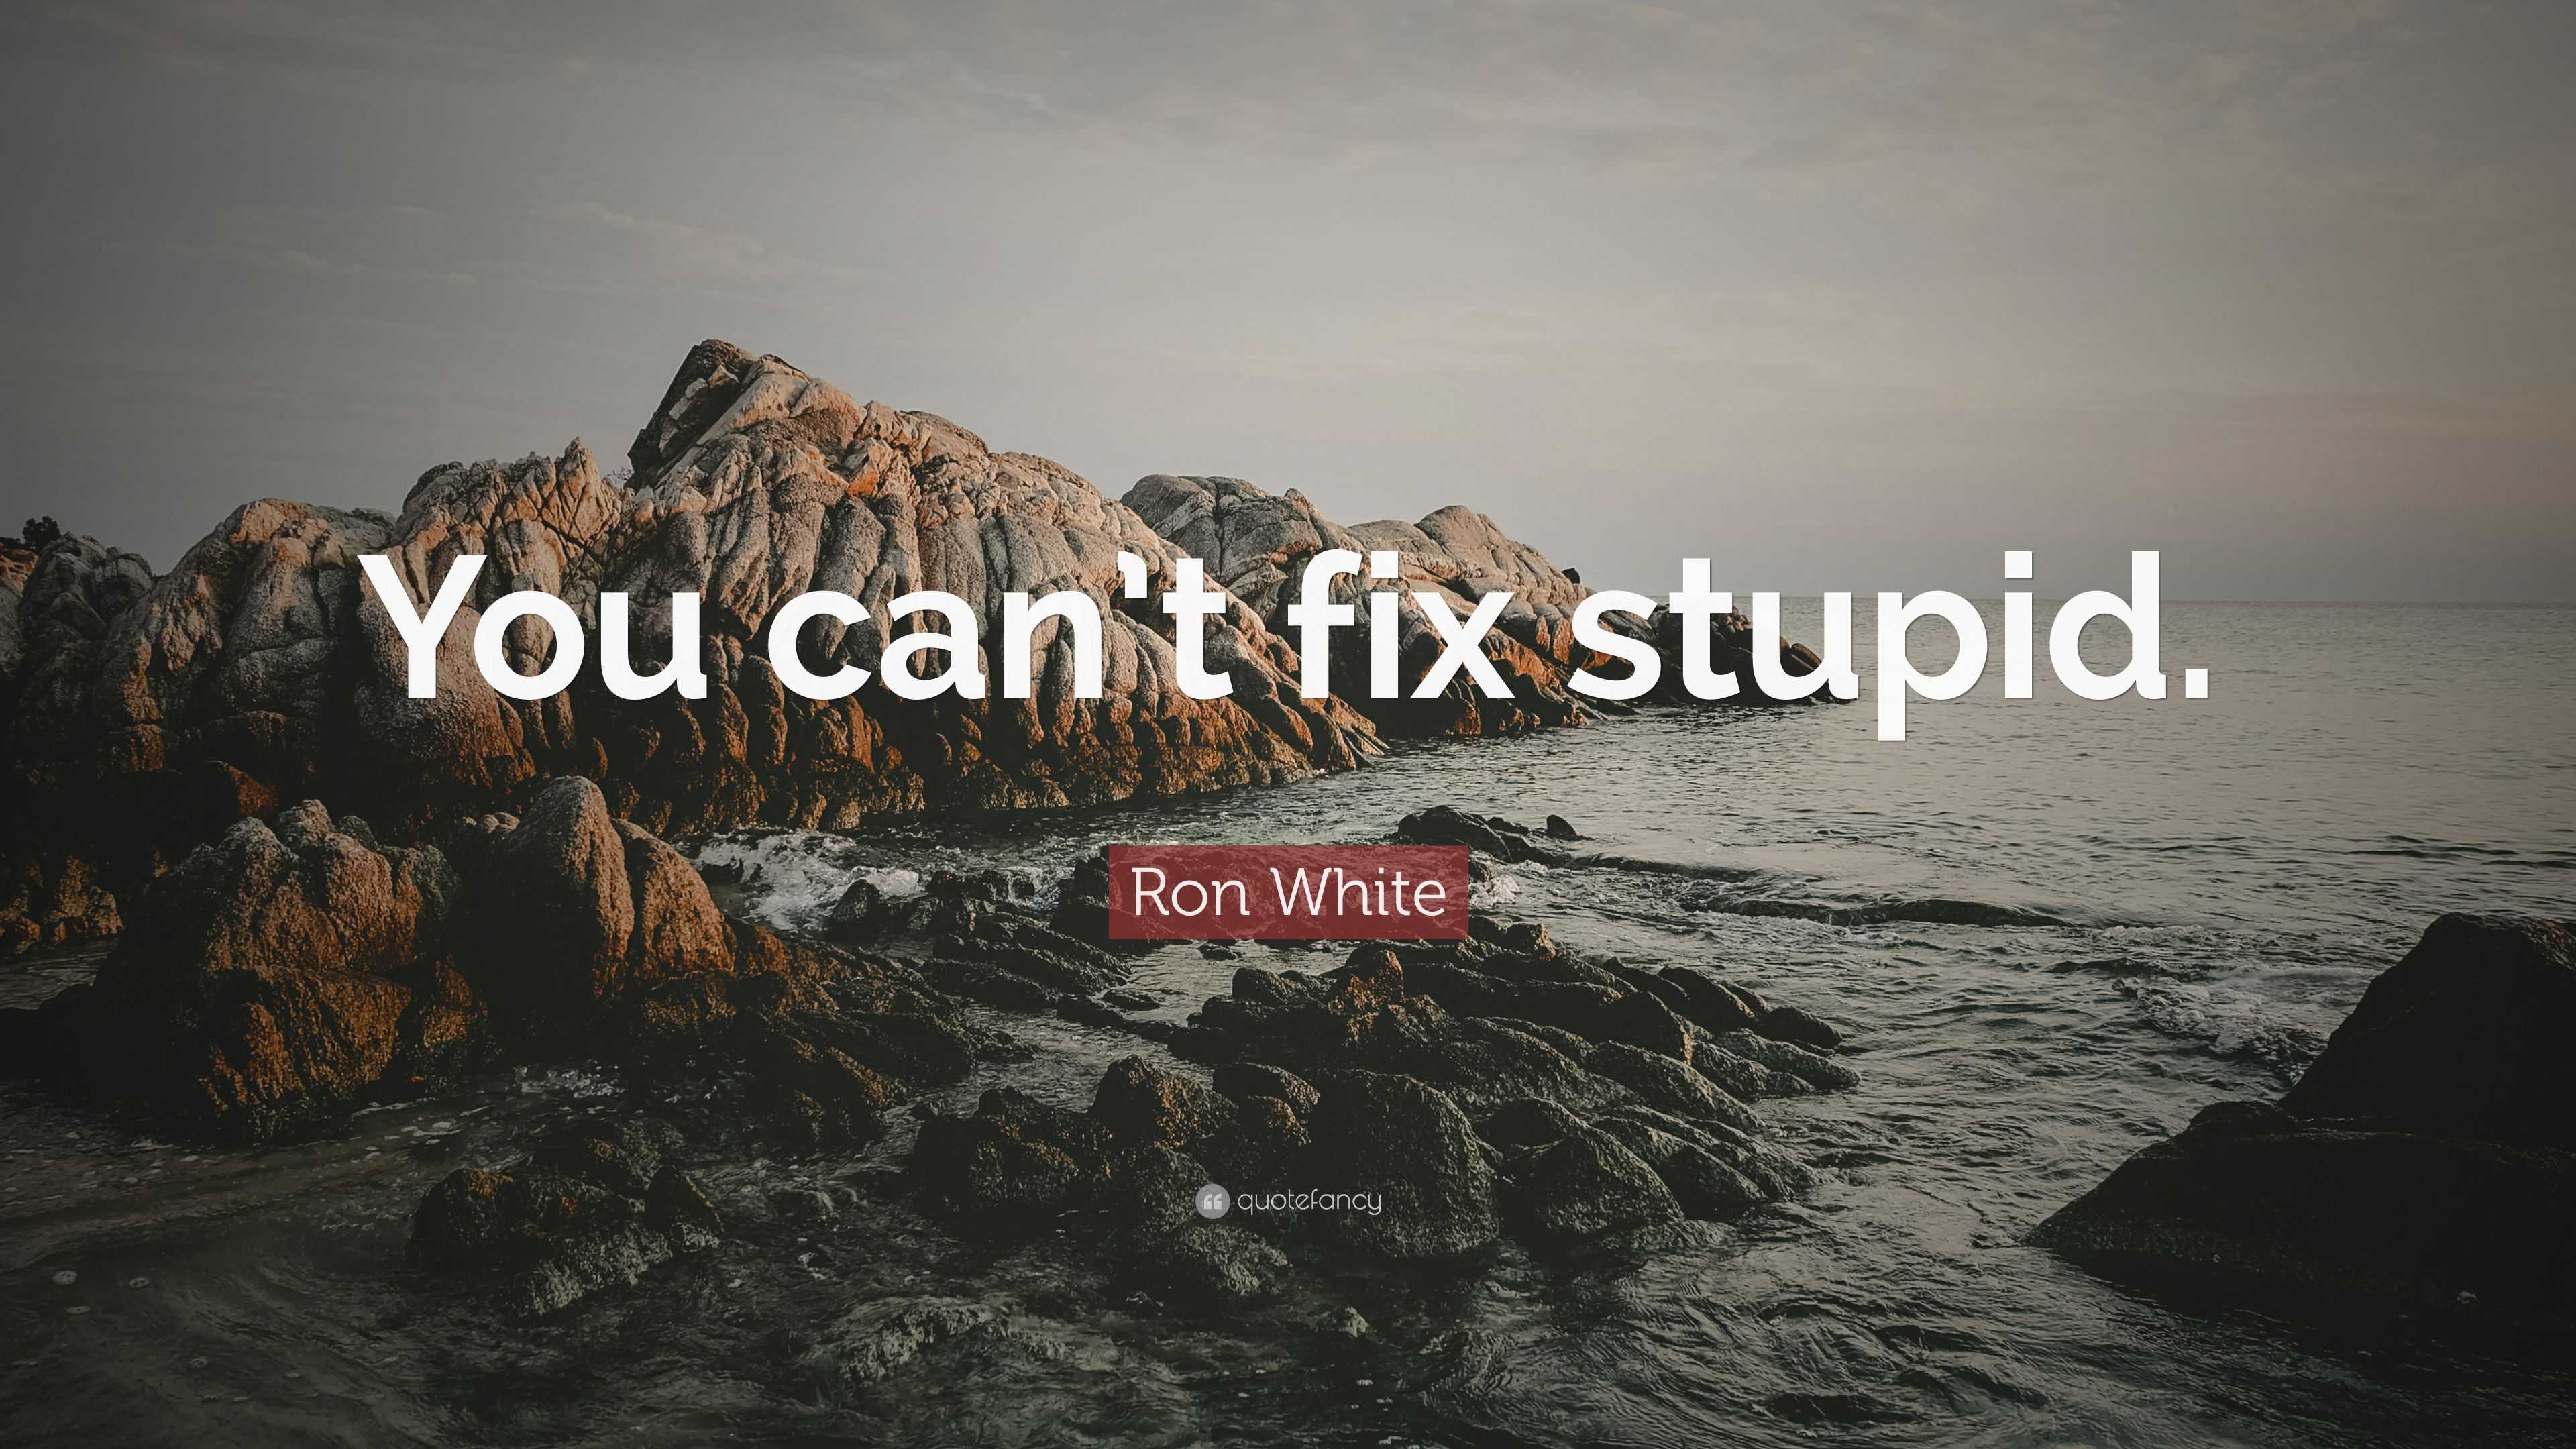 Ron White Quote: "You can't fix stupid." (12 wallpapers) - Quotefancy